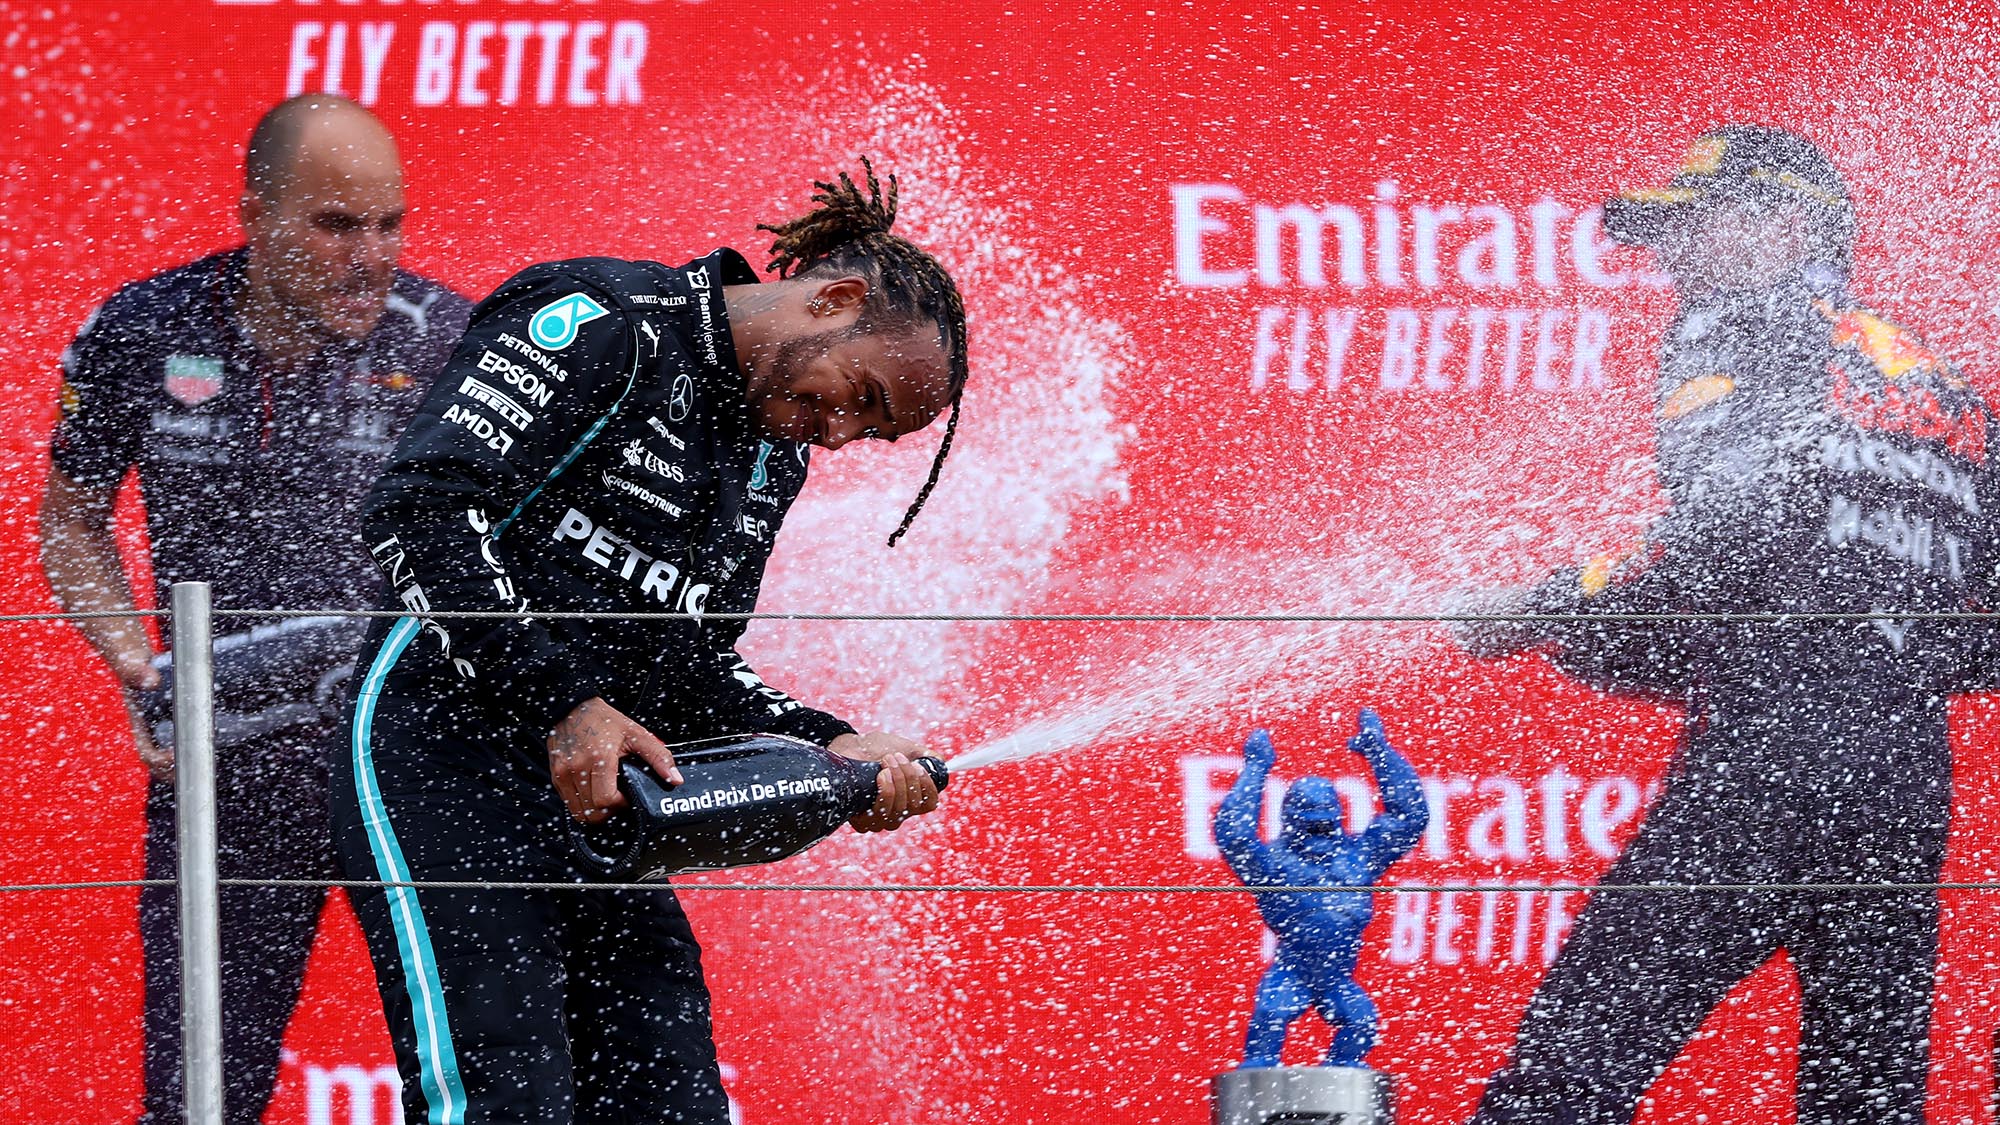 Lewis Hamilton and Max Verstappen spray champ[agne on the podium at the 2021 French Grand Prix